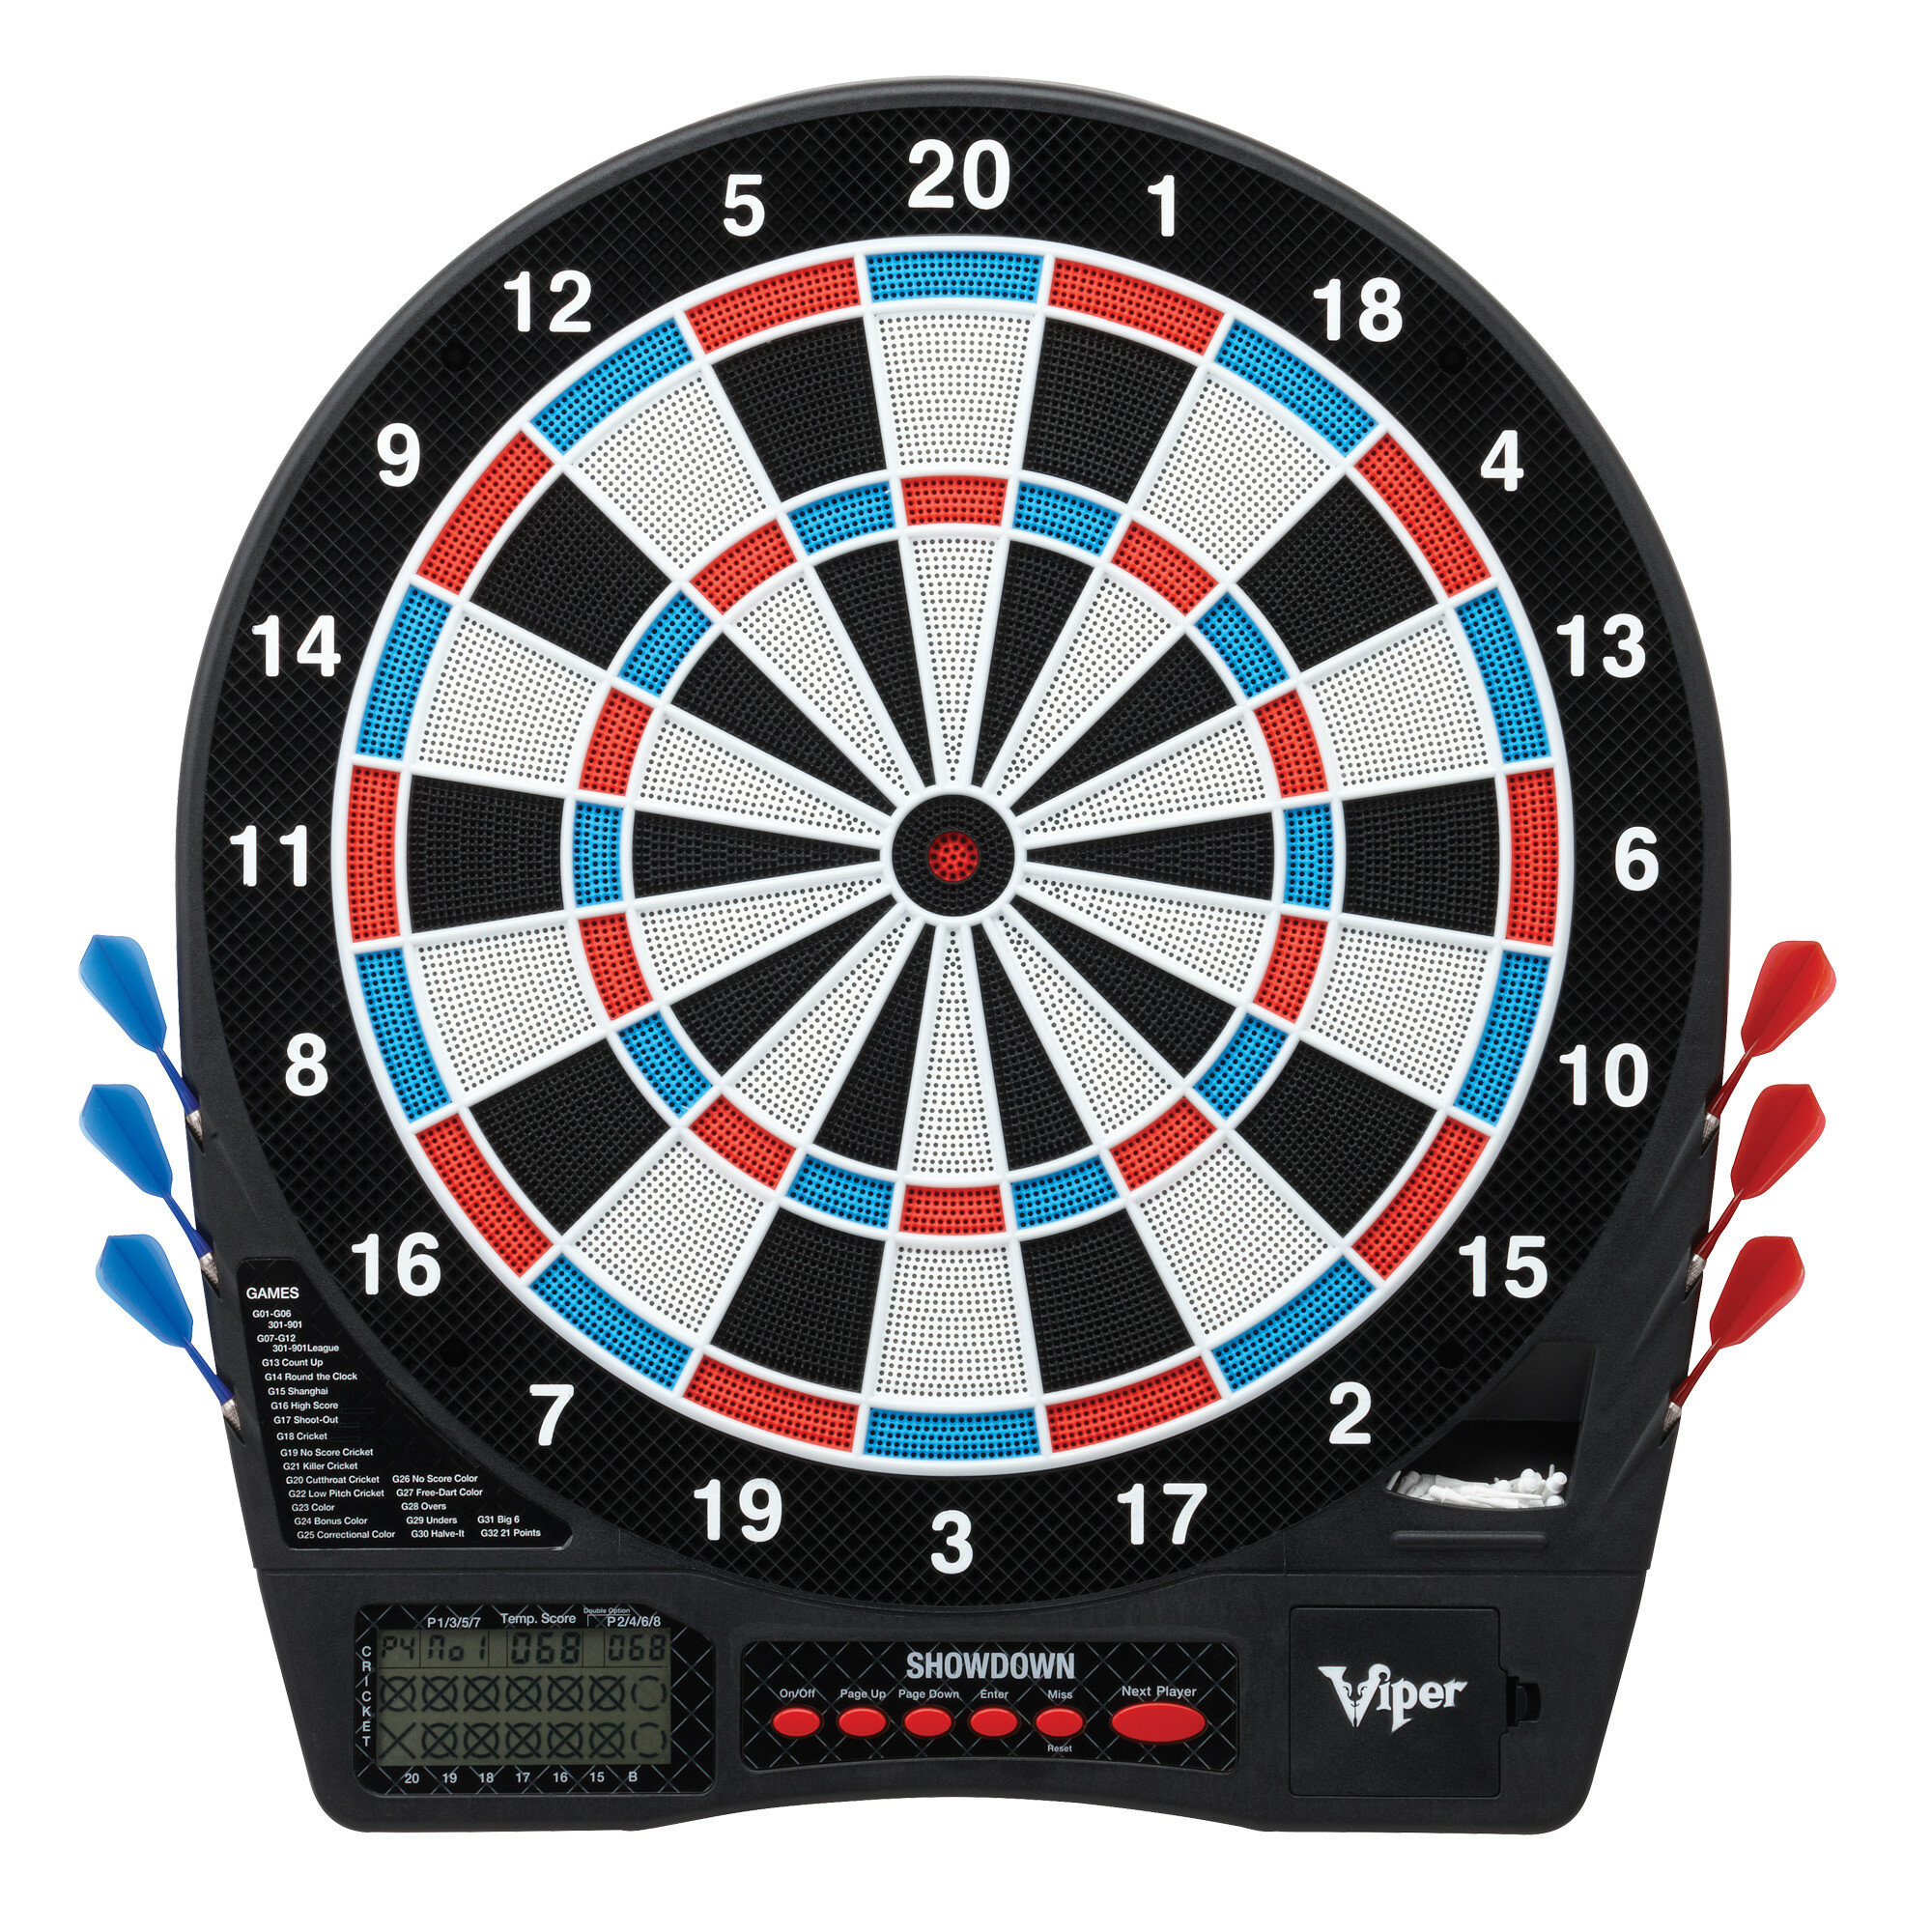 Electronic Dart Board with Replace Dart Heads 16 Players 4 LED Display Screens 